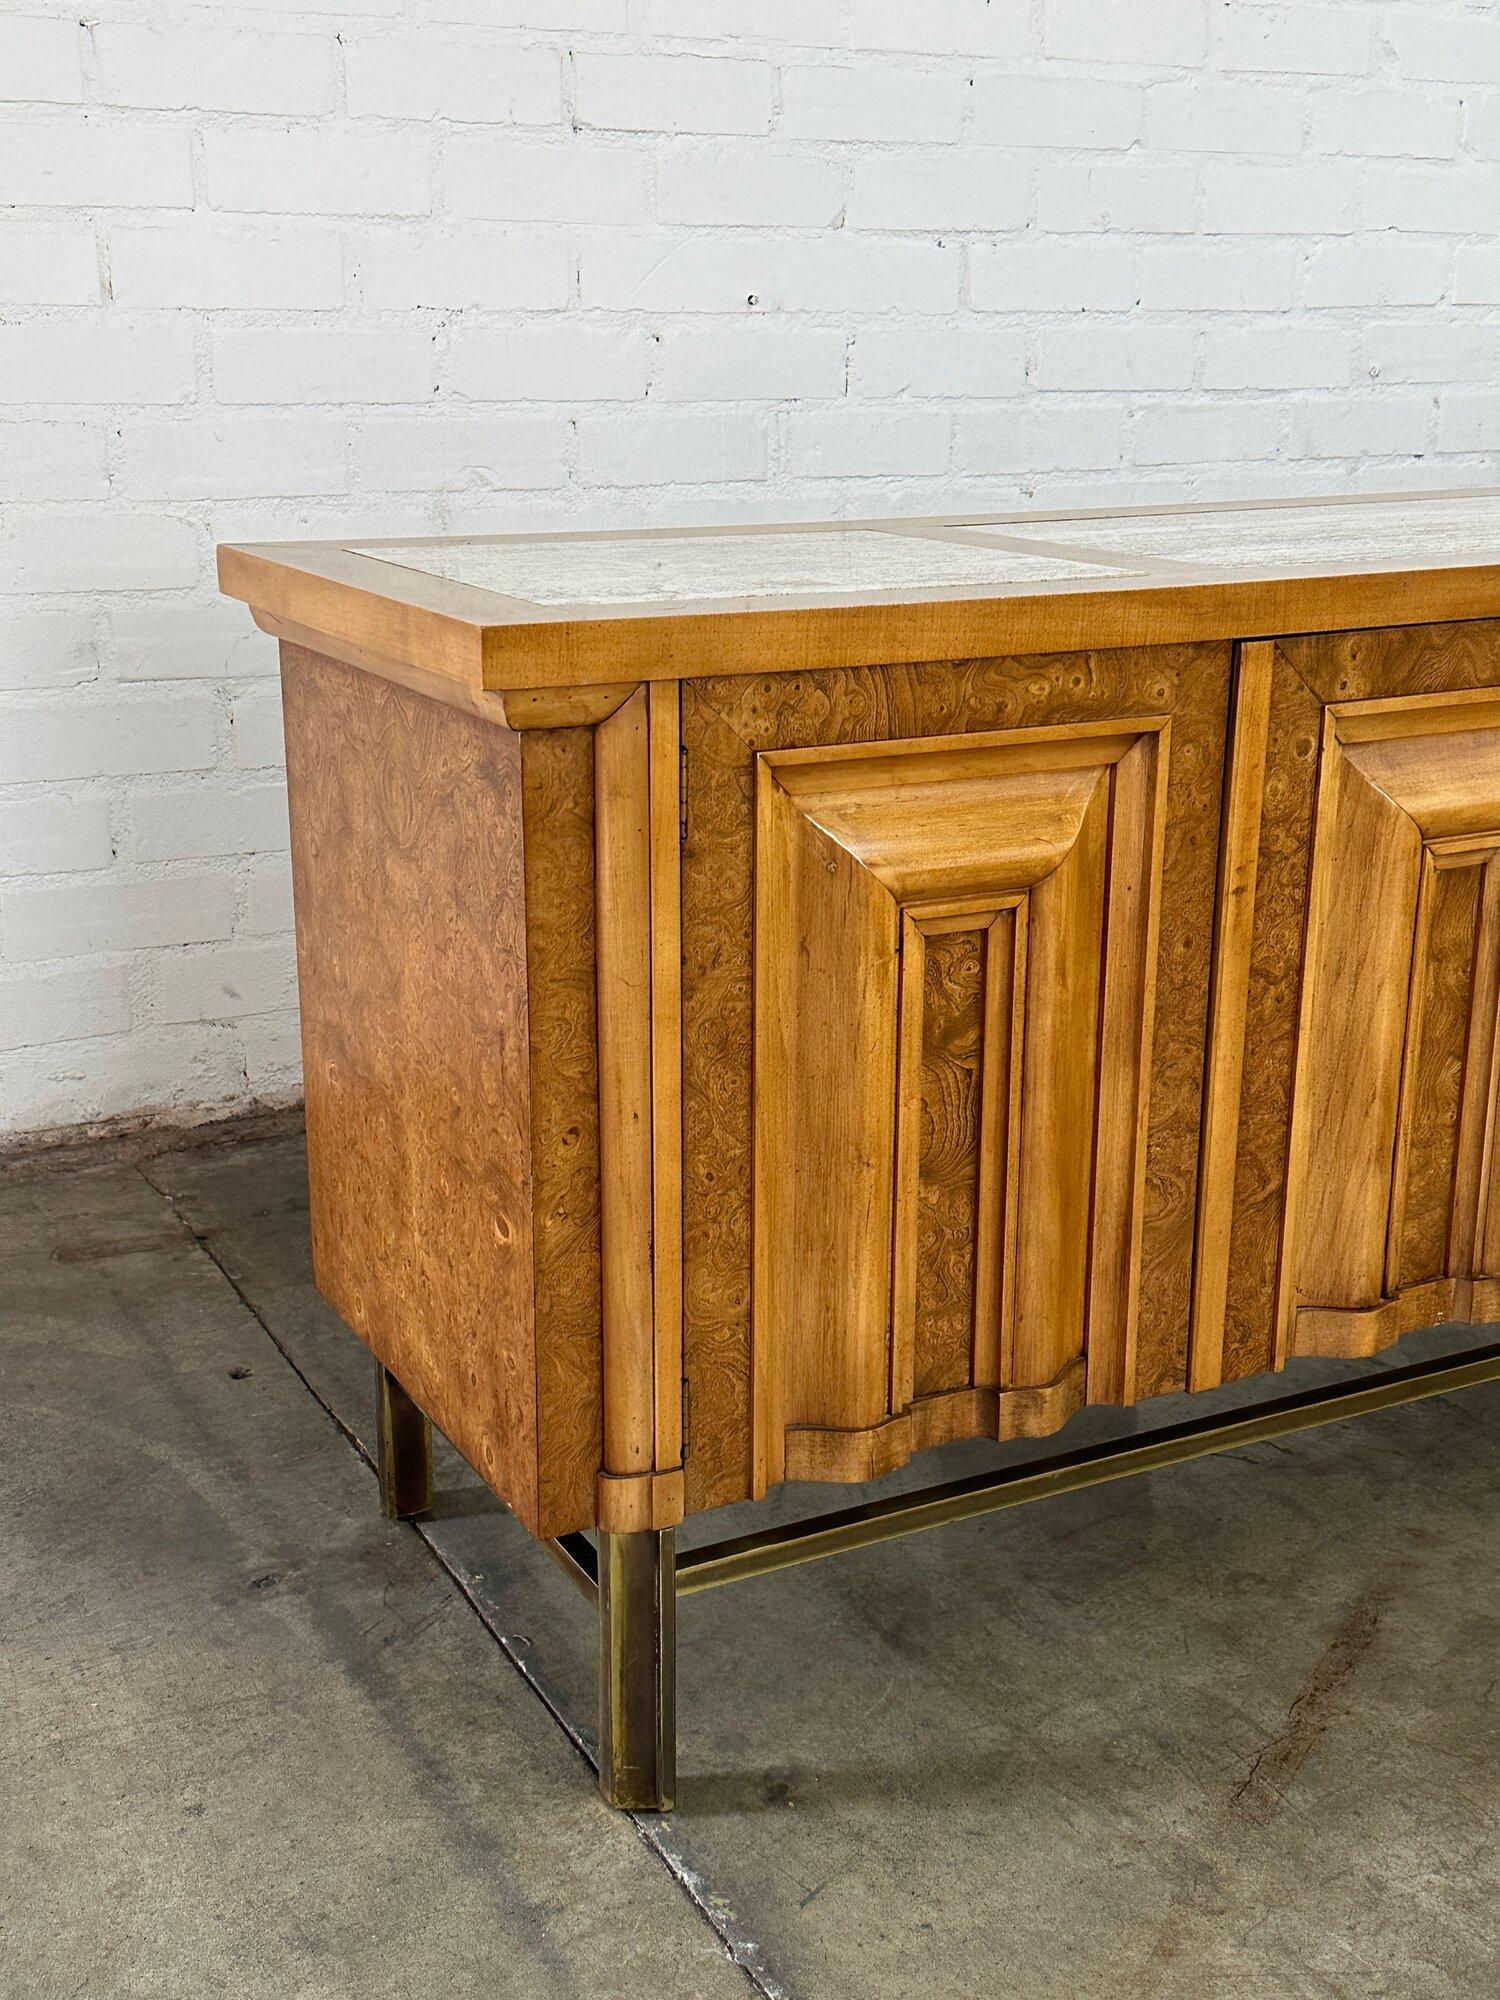 W76 D20.25 H31

1960’s Burl wood, brass & Travertine credenza by J.L. Metz. Item has not been refinished but is in great vintage condition. Credenza features a brass stretcher, inset travertine tops and Burl wood through out. Credenza has sculpted